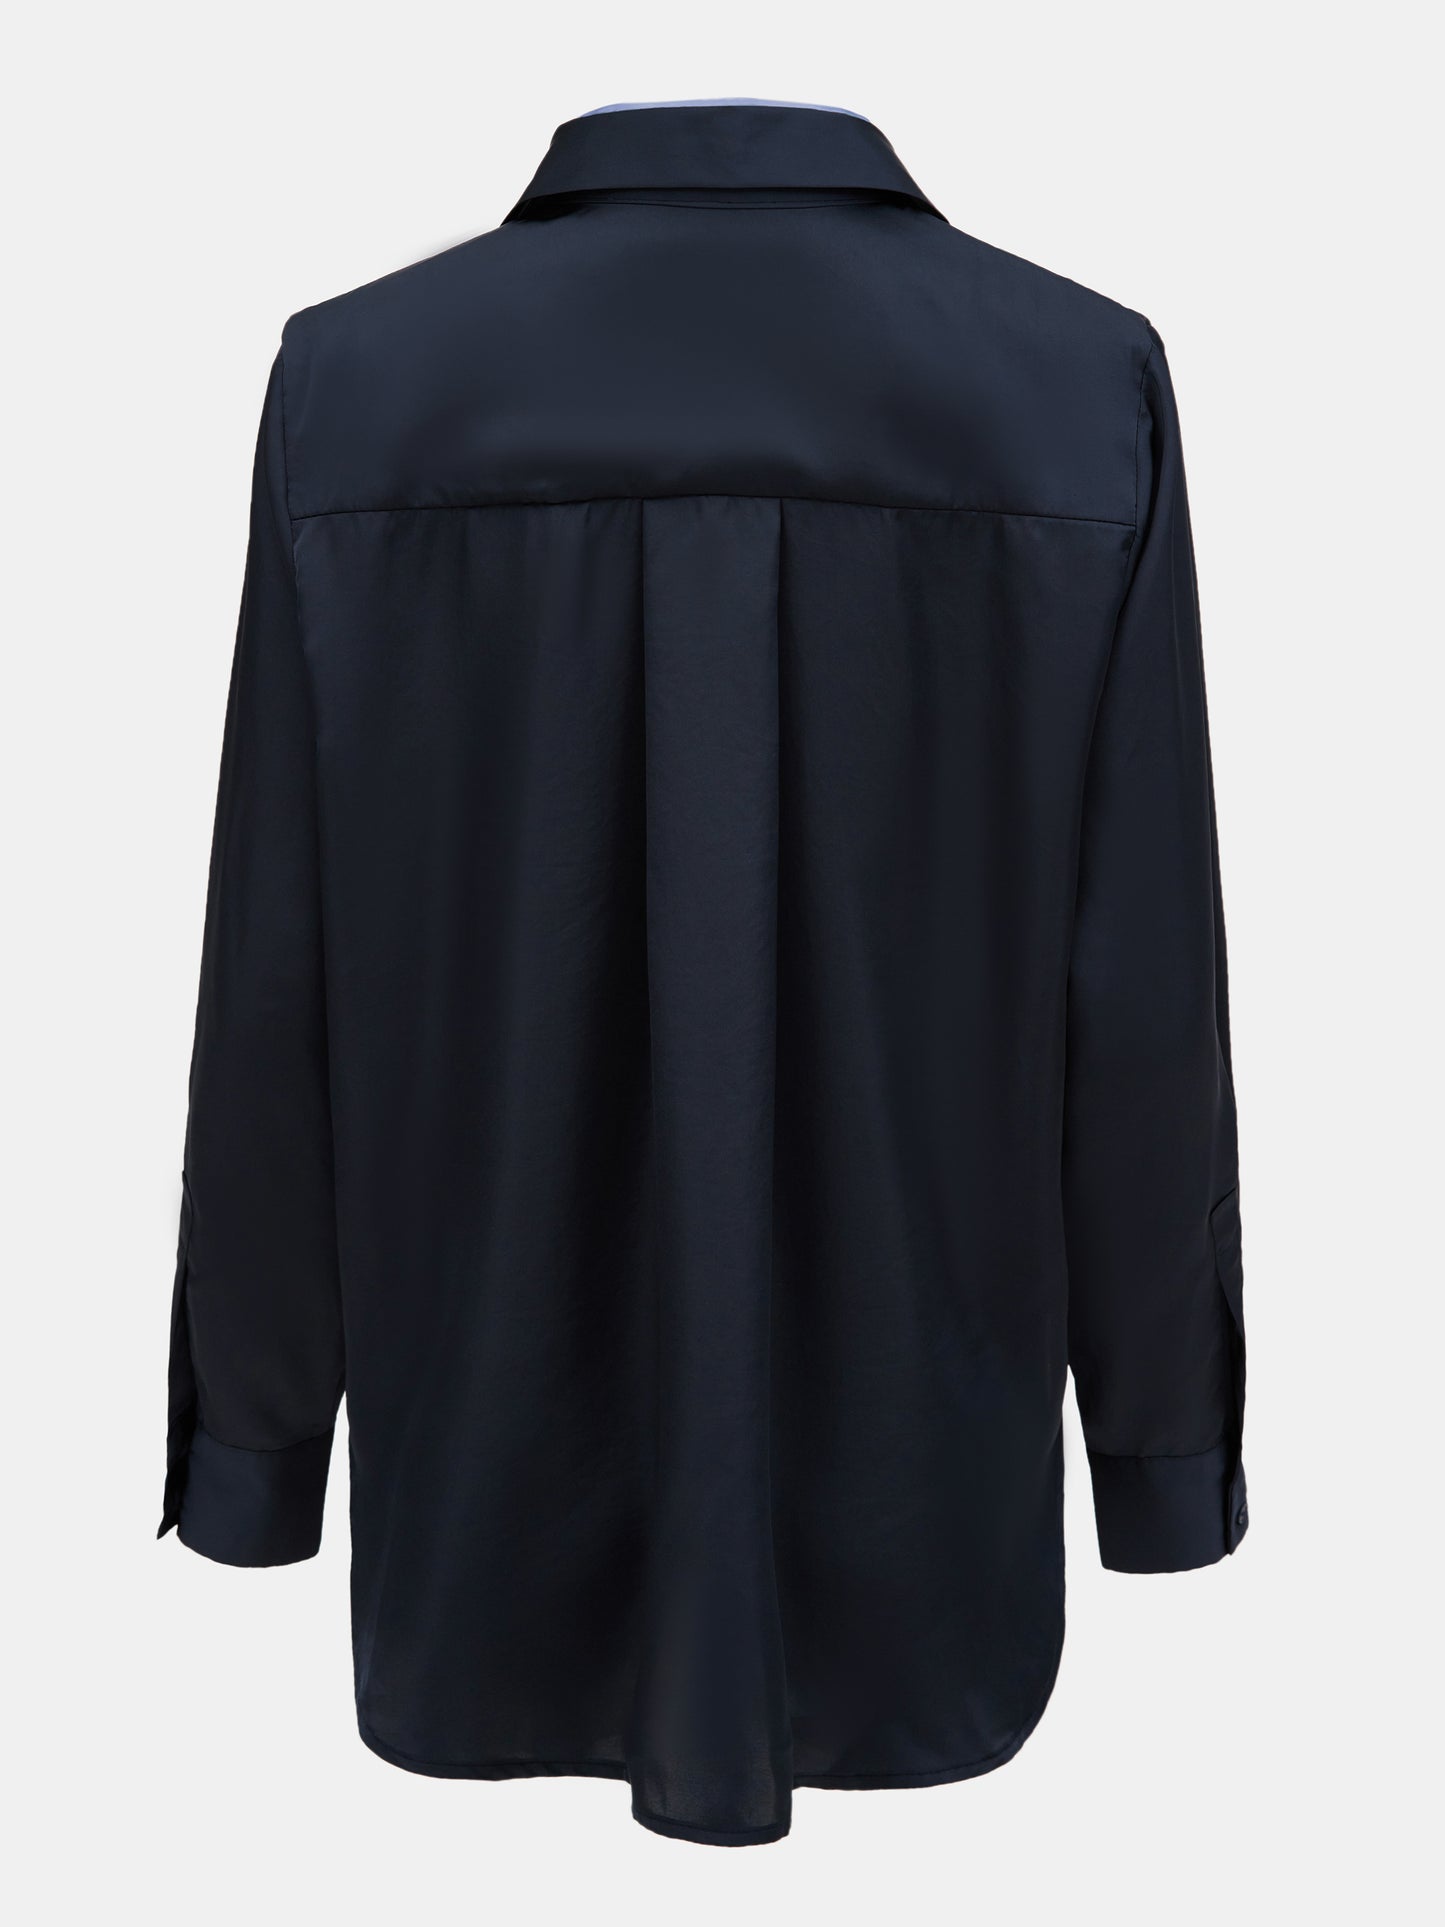 Adjustable Twisted Double Layer Shirt, Navy